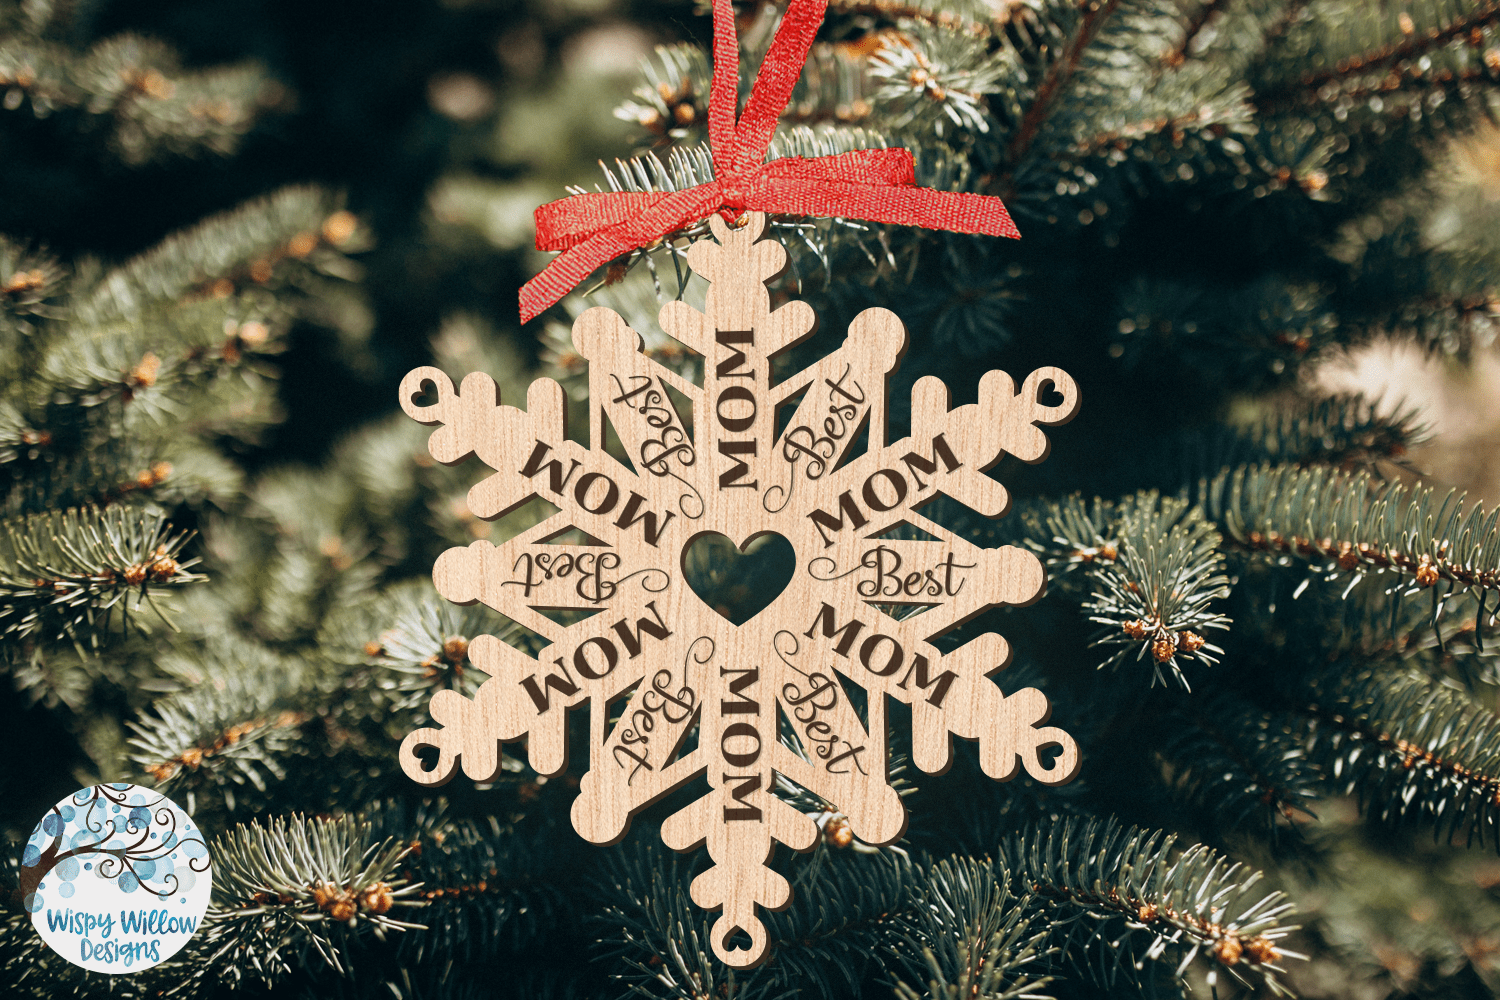 Best Mom Snowflake Christmas Ornament for Glowforge or Laser Cutter Wispy Willow Designs Company